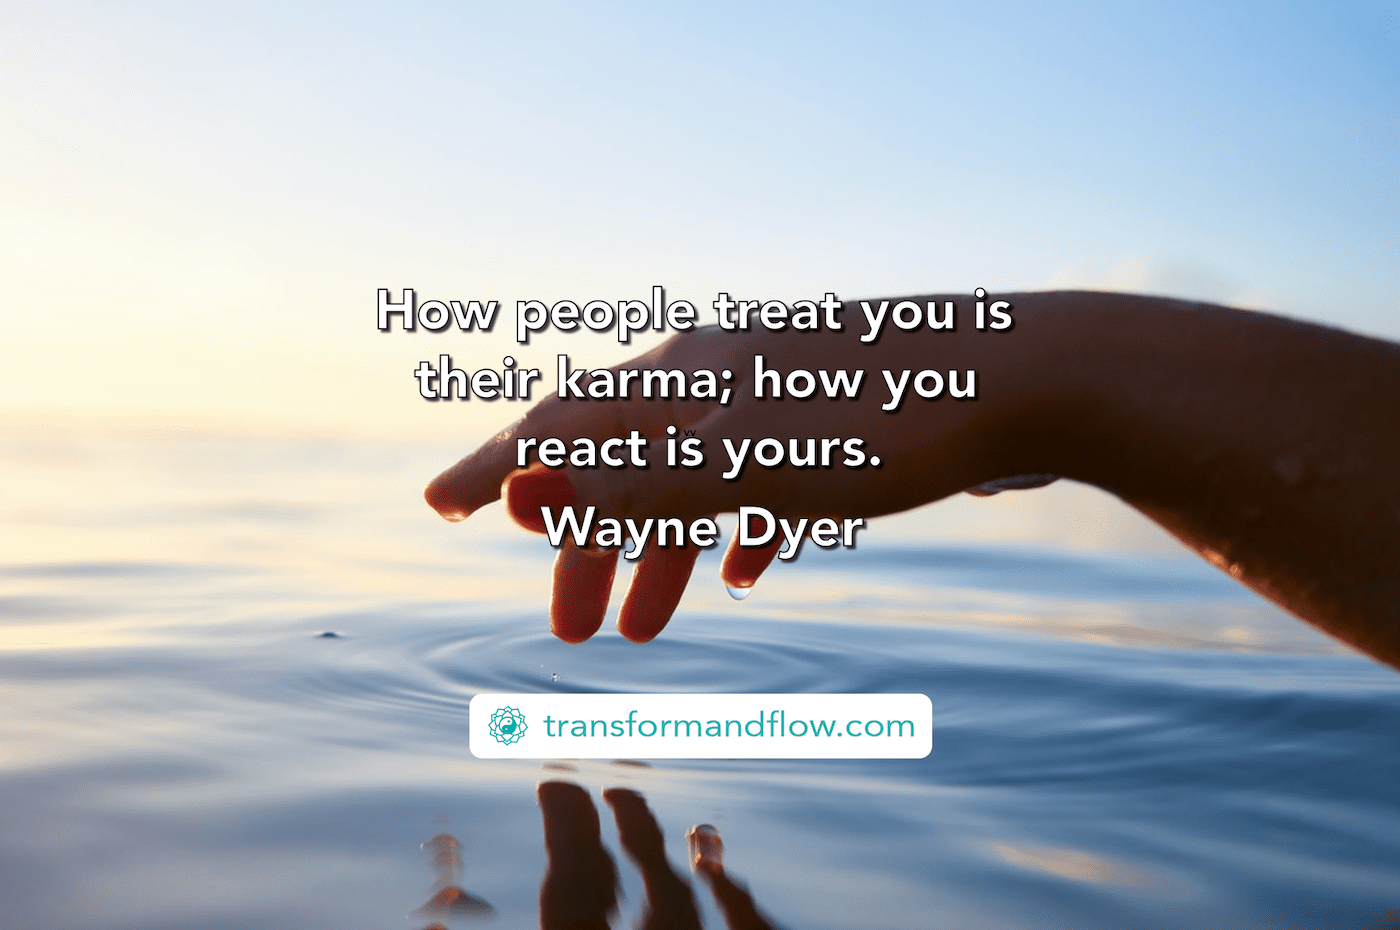 "How people treat you is their karma; how you react is yours." Wayne Dyer